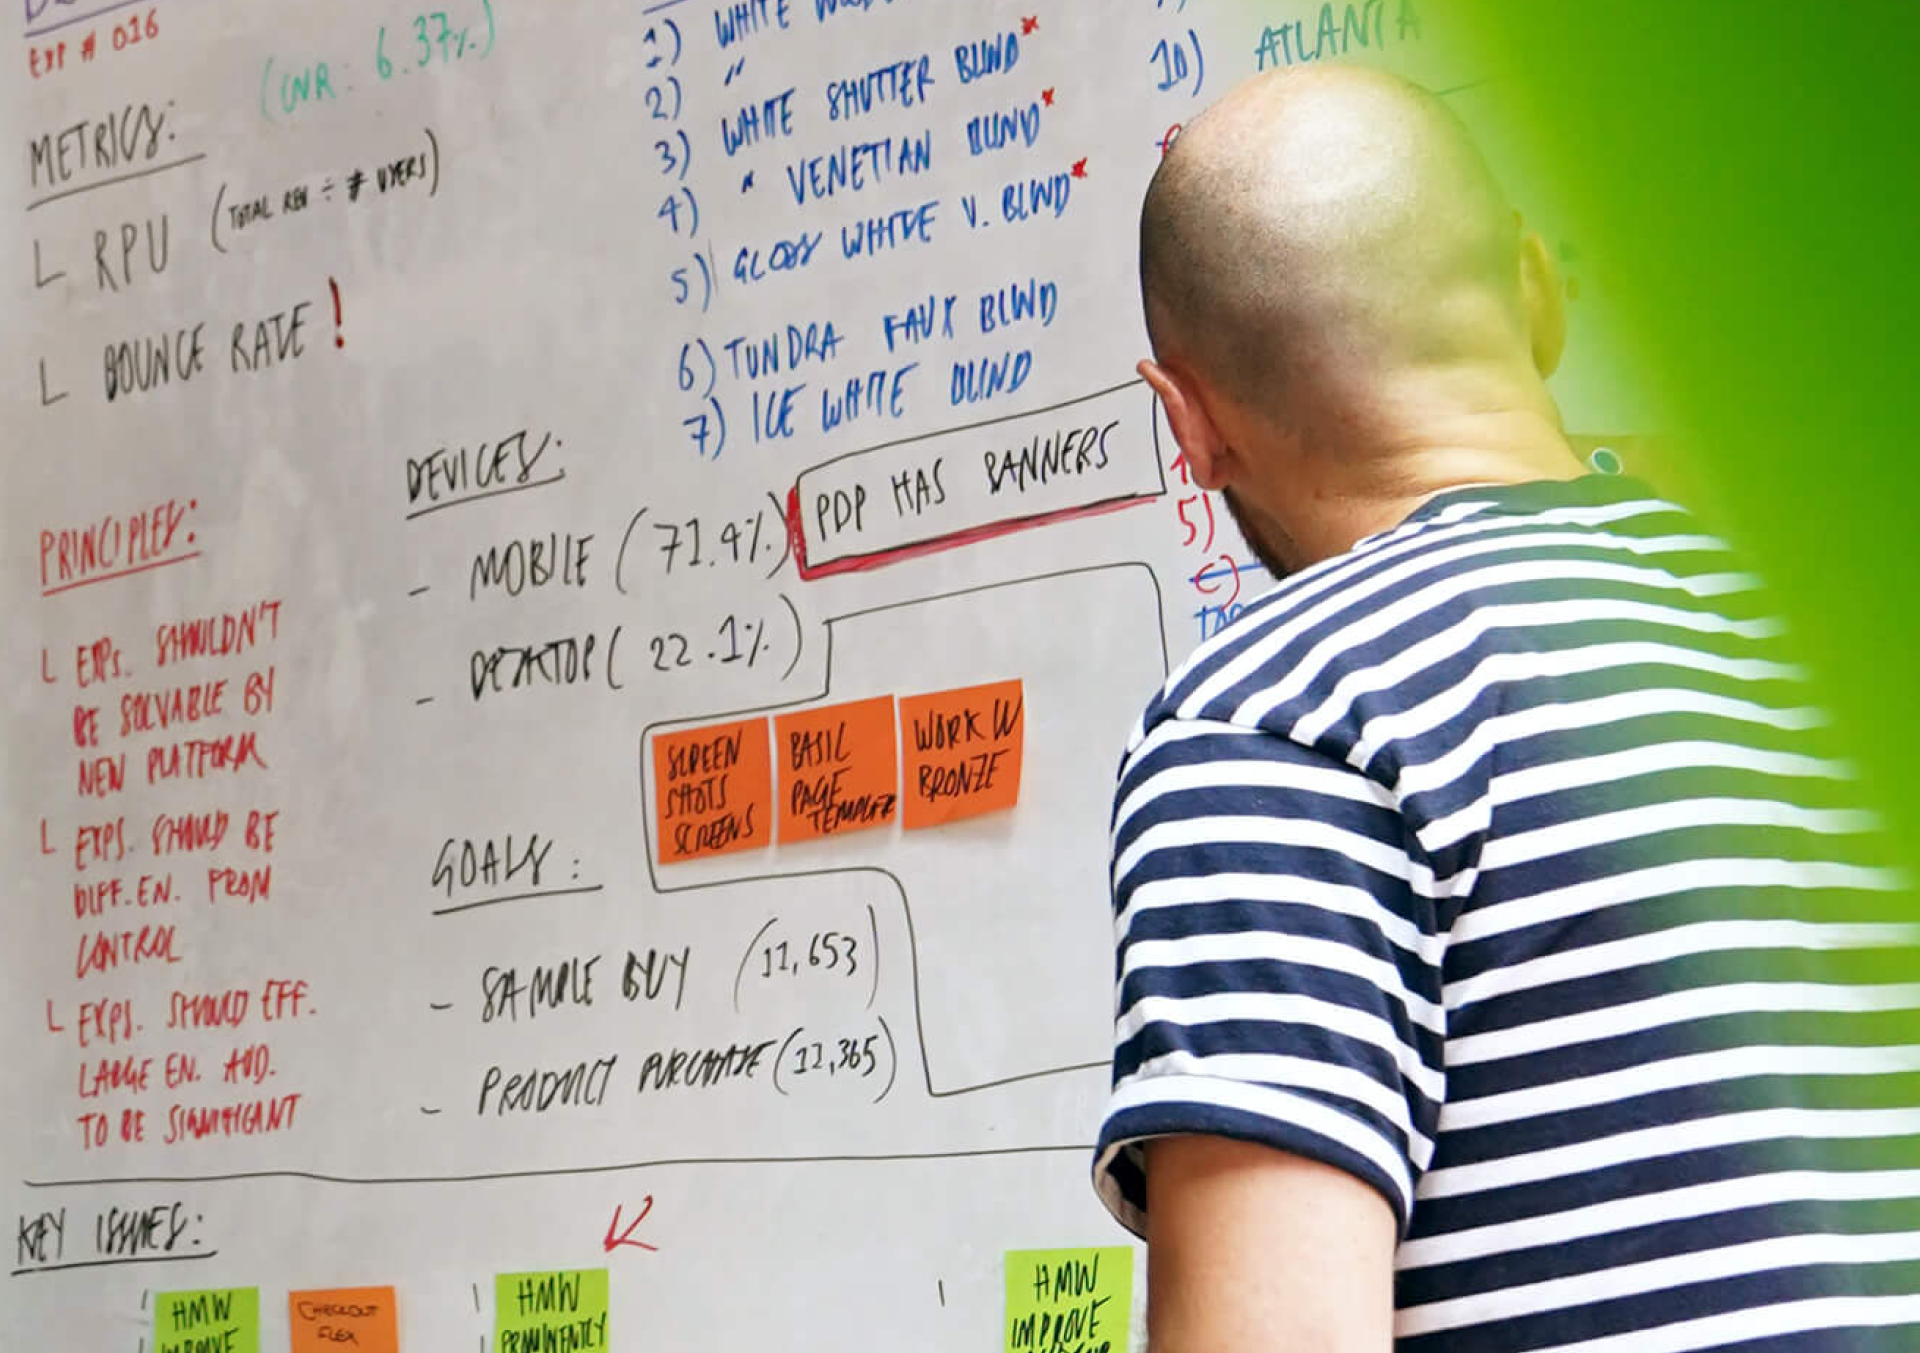 A man in a stripy t-shirt standing in front of a whiteboard that has post it notes and writing on regarding a CRO experiment.